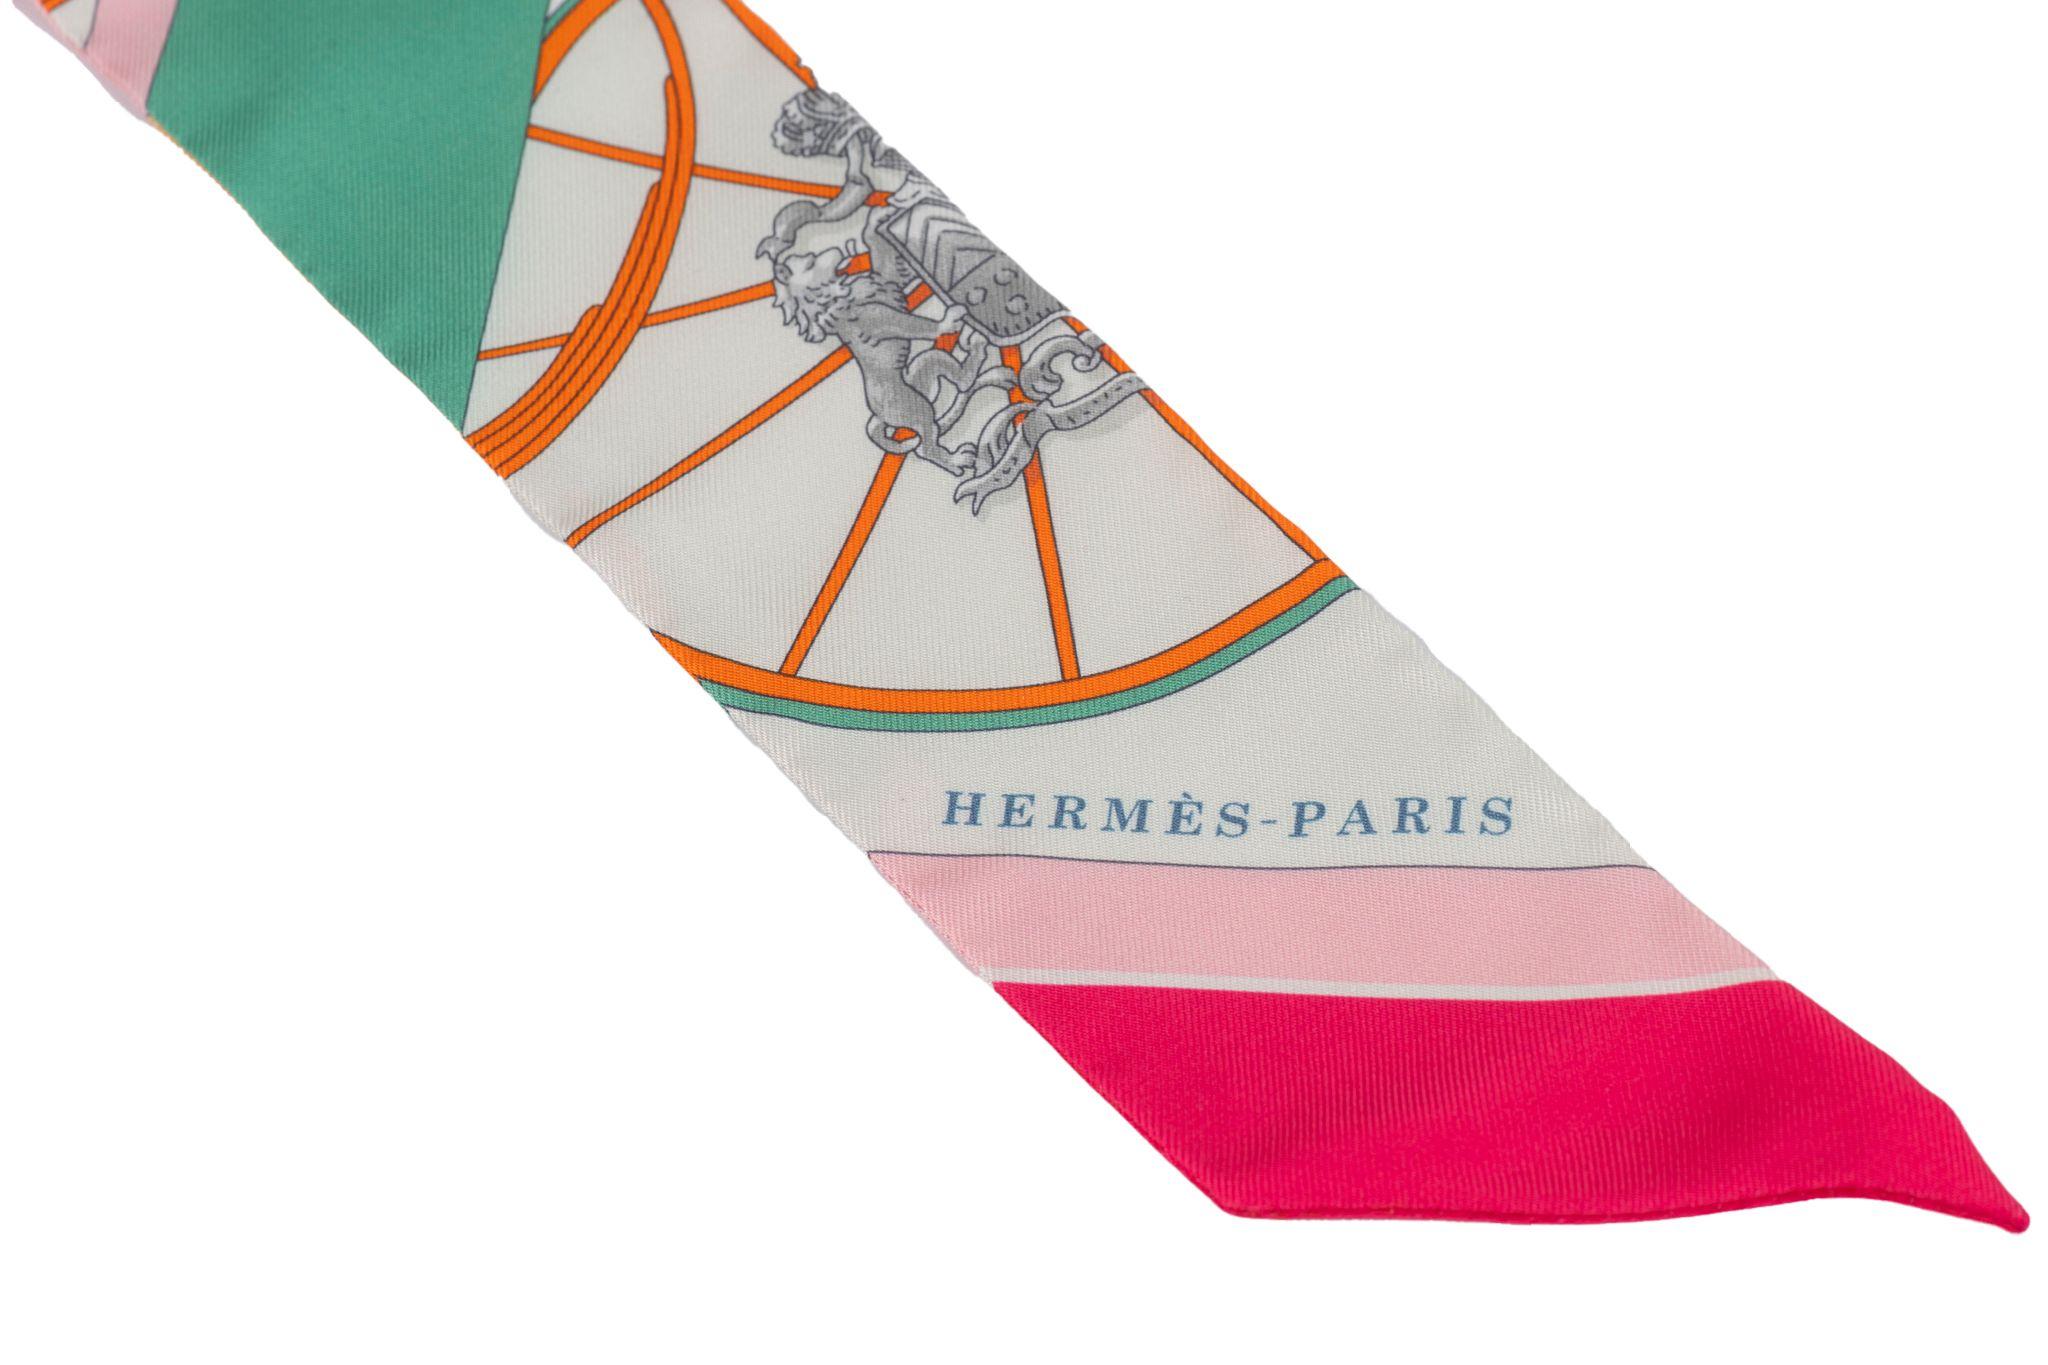 Hermès Twilly silk twill scarf with hardware. Can be worn as a scarf or as a bracelet. Comes with original box.